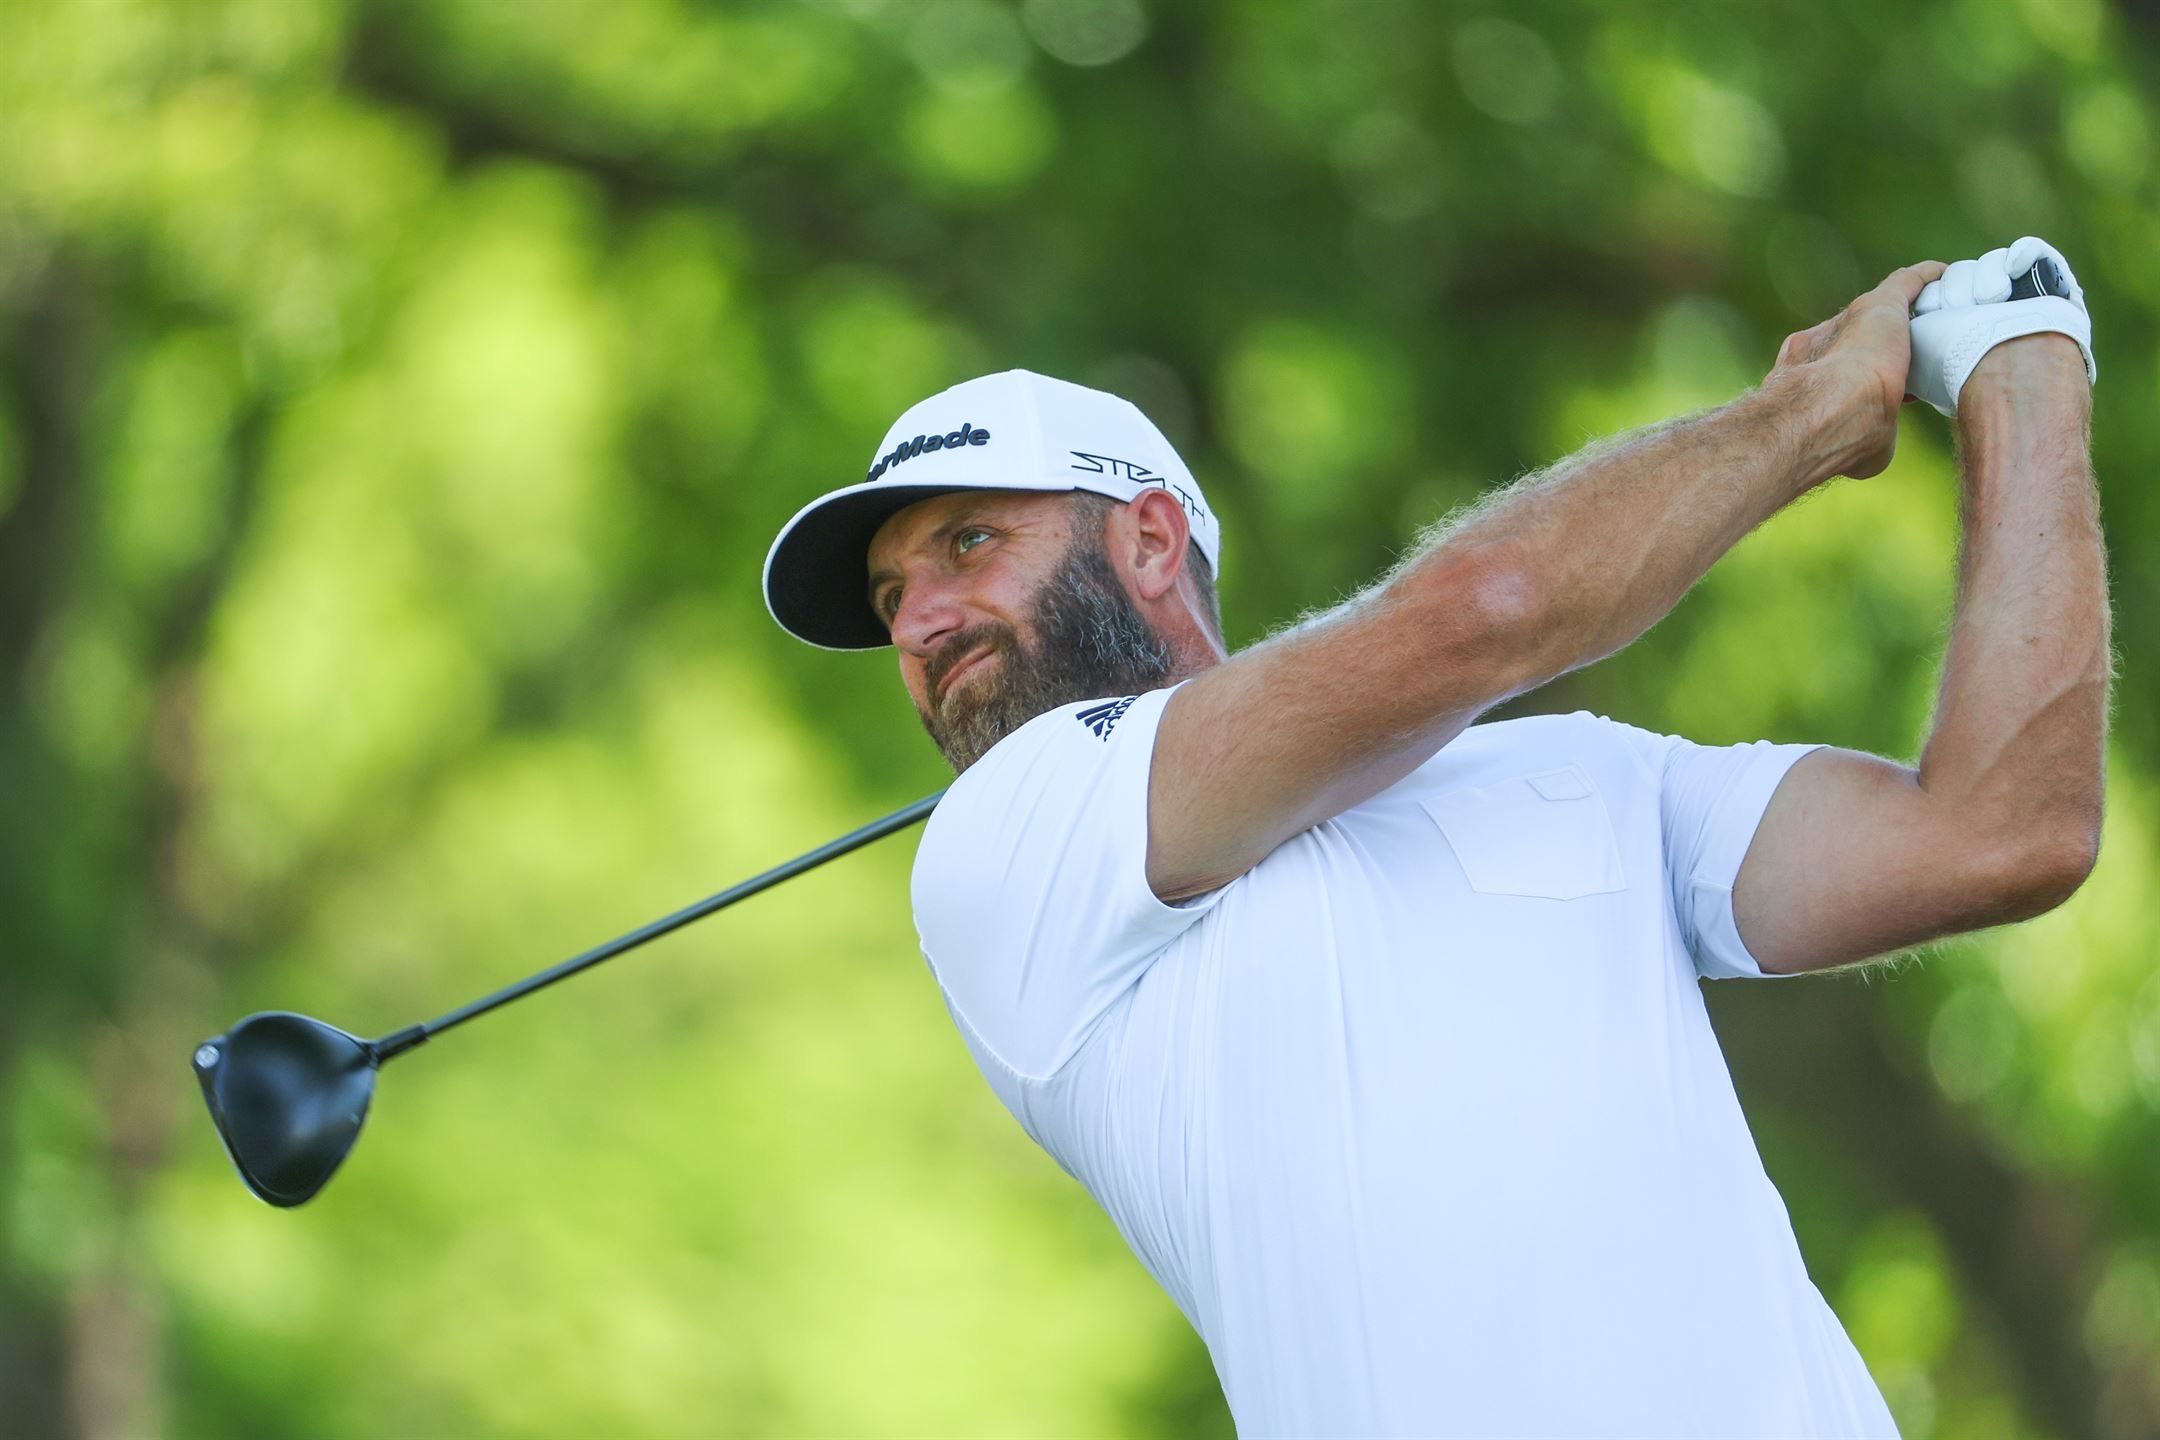 Who is Dustin Johnson?